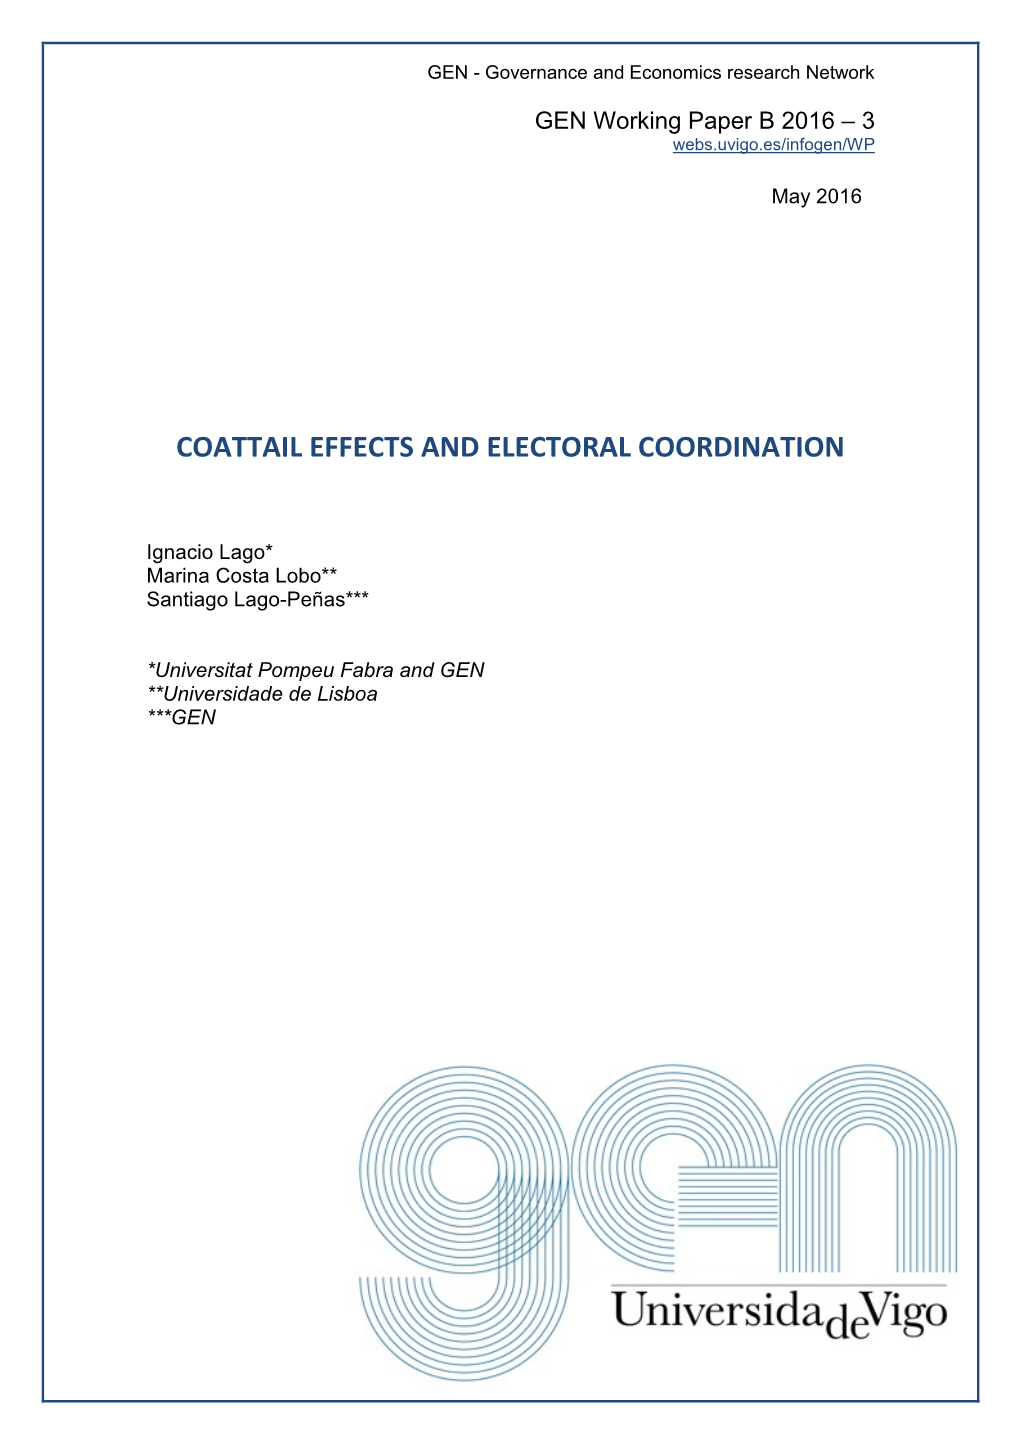 Coattail Effects and Electoral Coordination